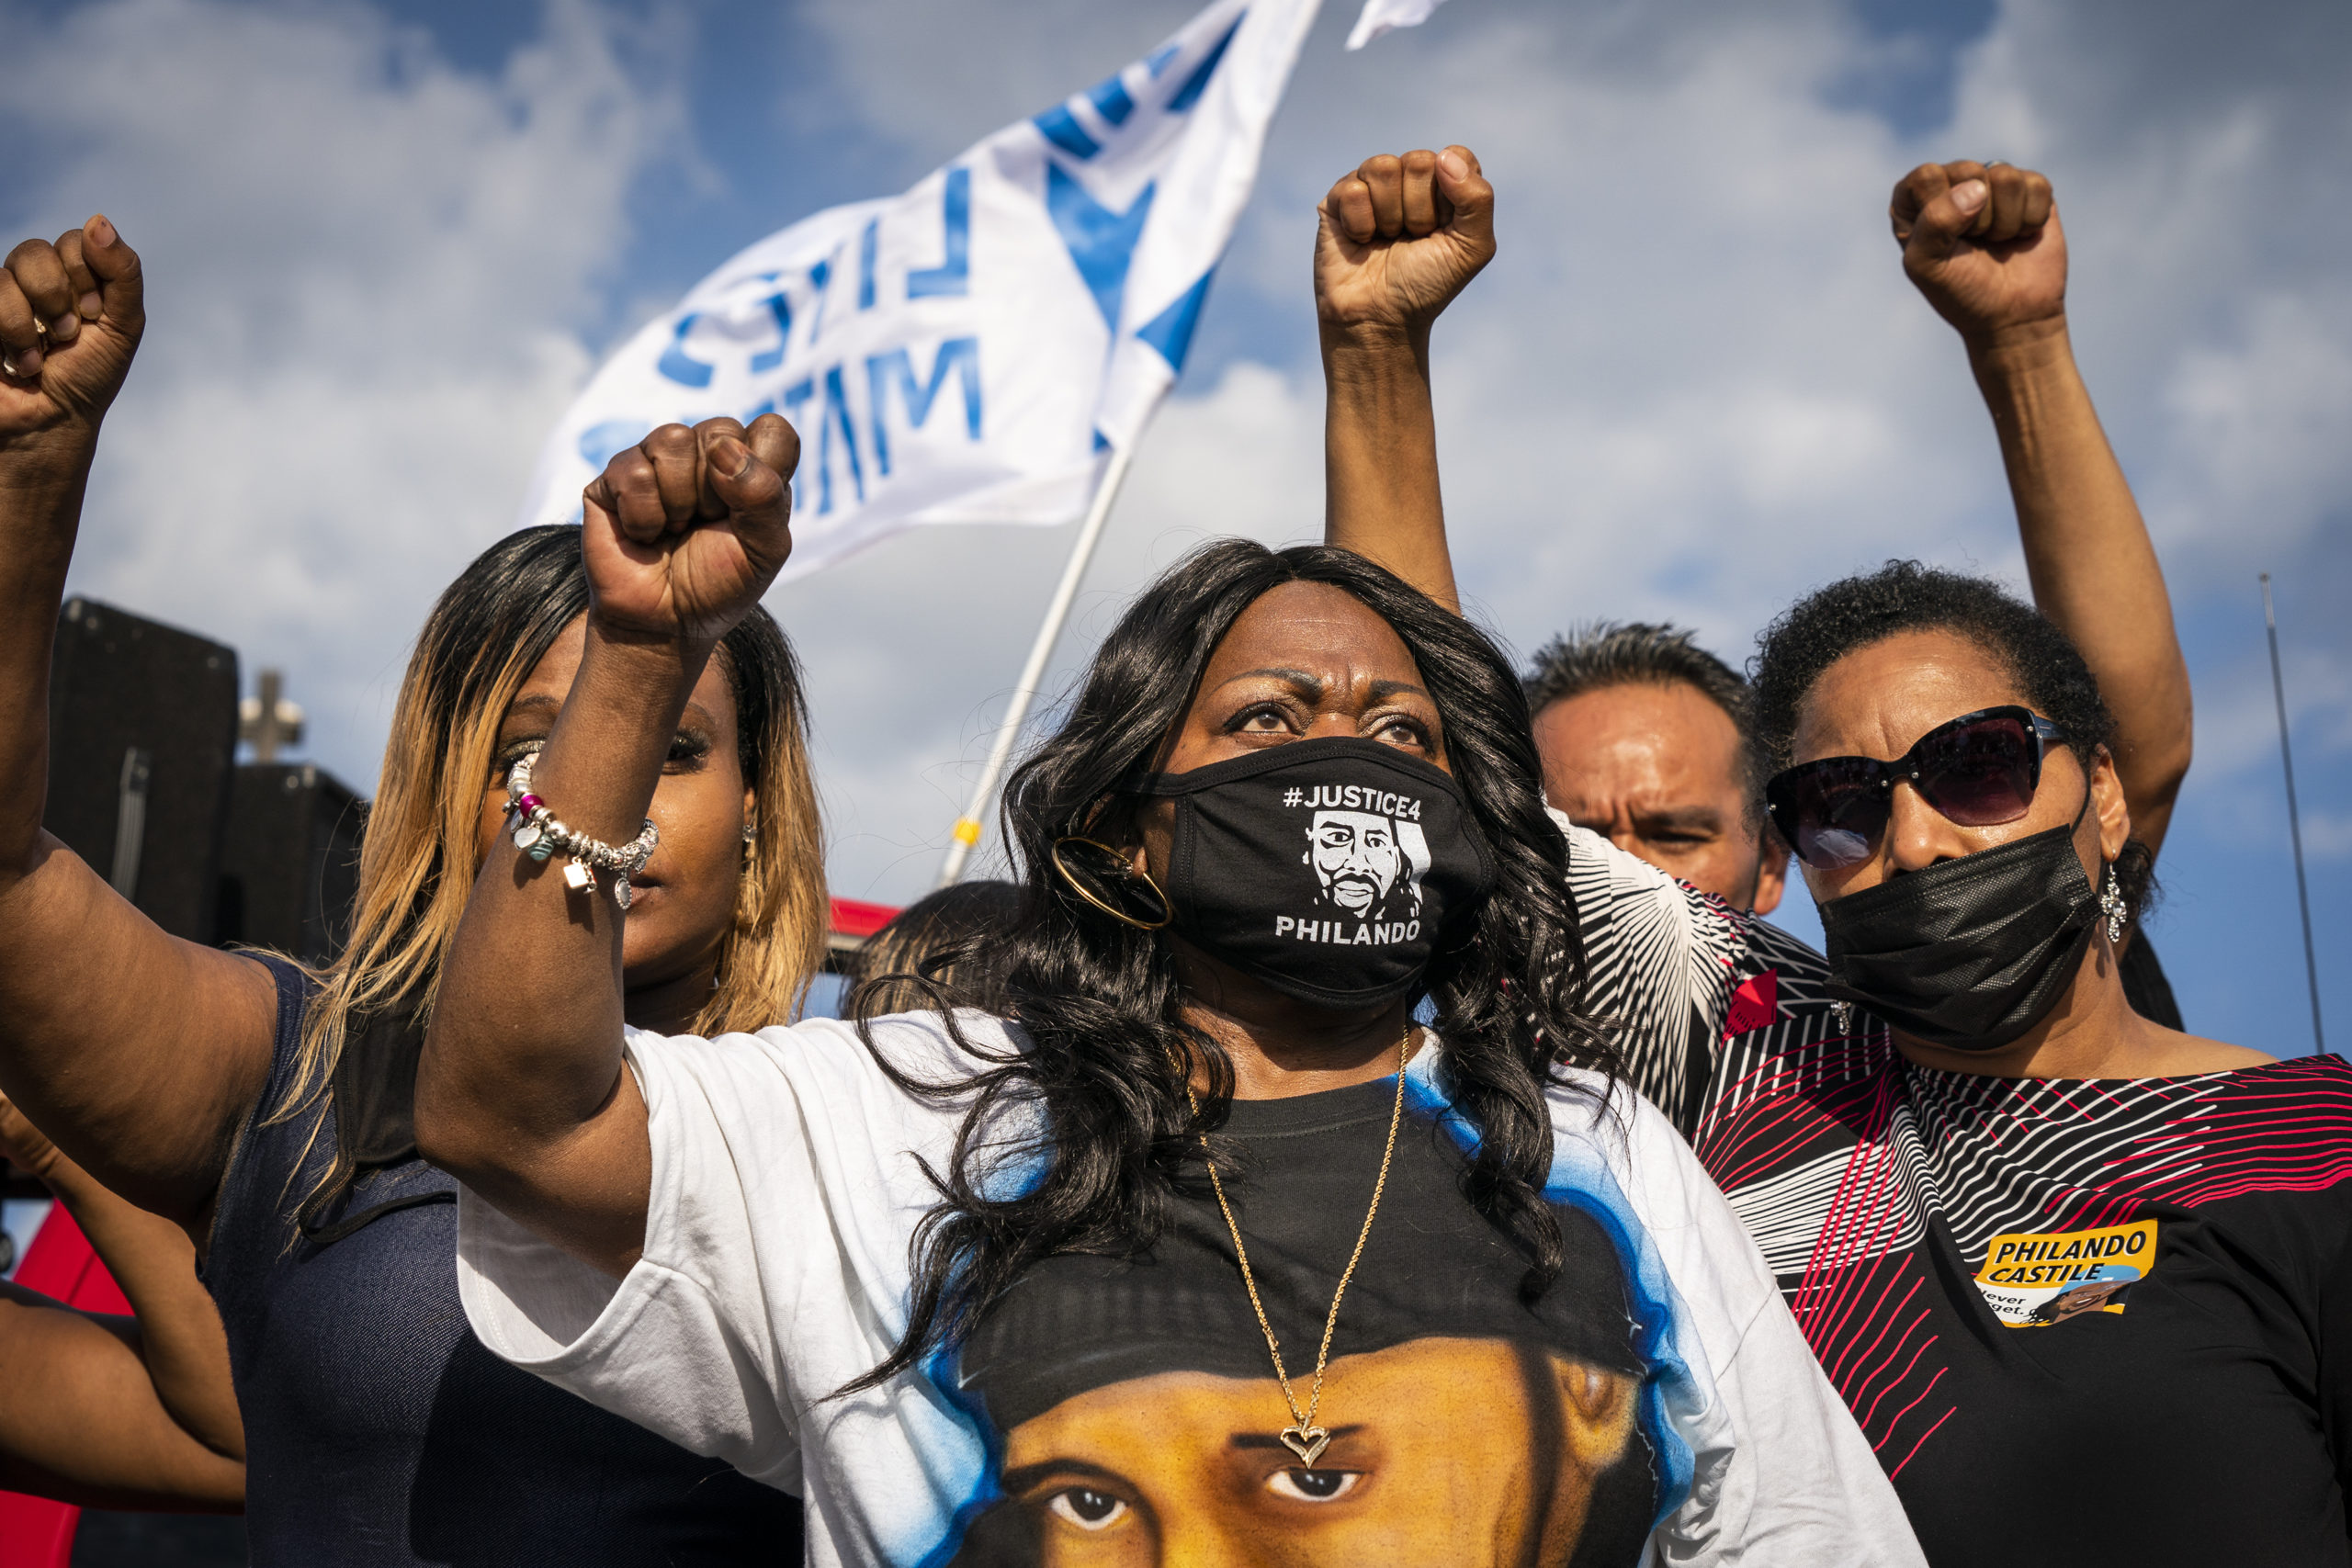 Wearing a mask that says "#Justice4Philando," Valerie Castile and three others raise a fist. A blue and white flag that reads "Black Lives Matter" waves in the background